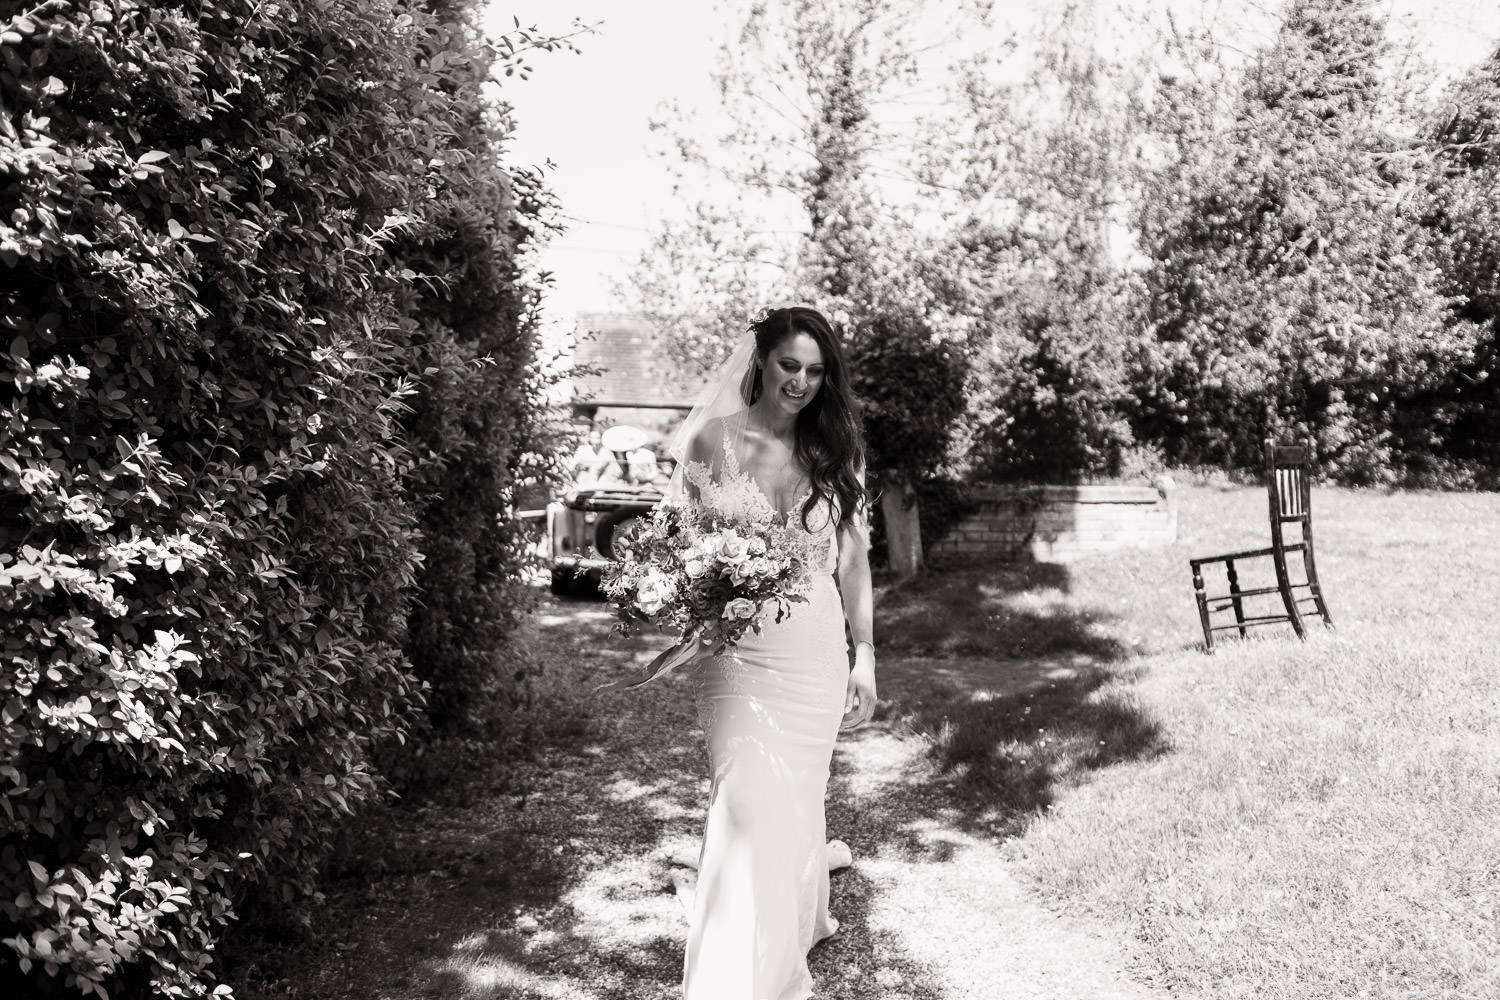 A smiling bride with long dark hair walks down the gravel path to the All Saints church in Purleigh Essex.